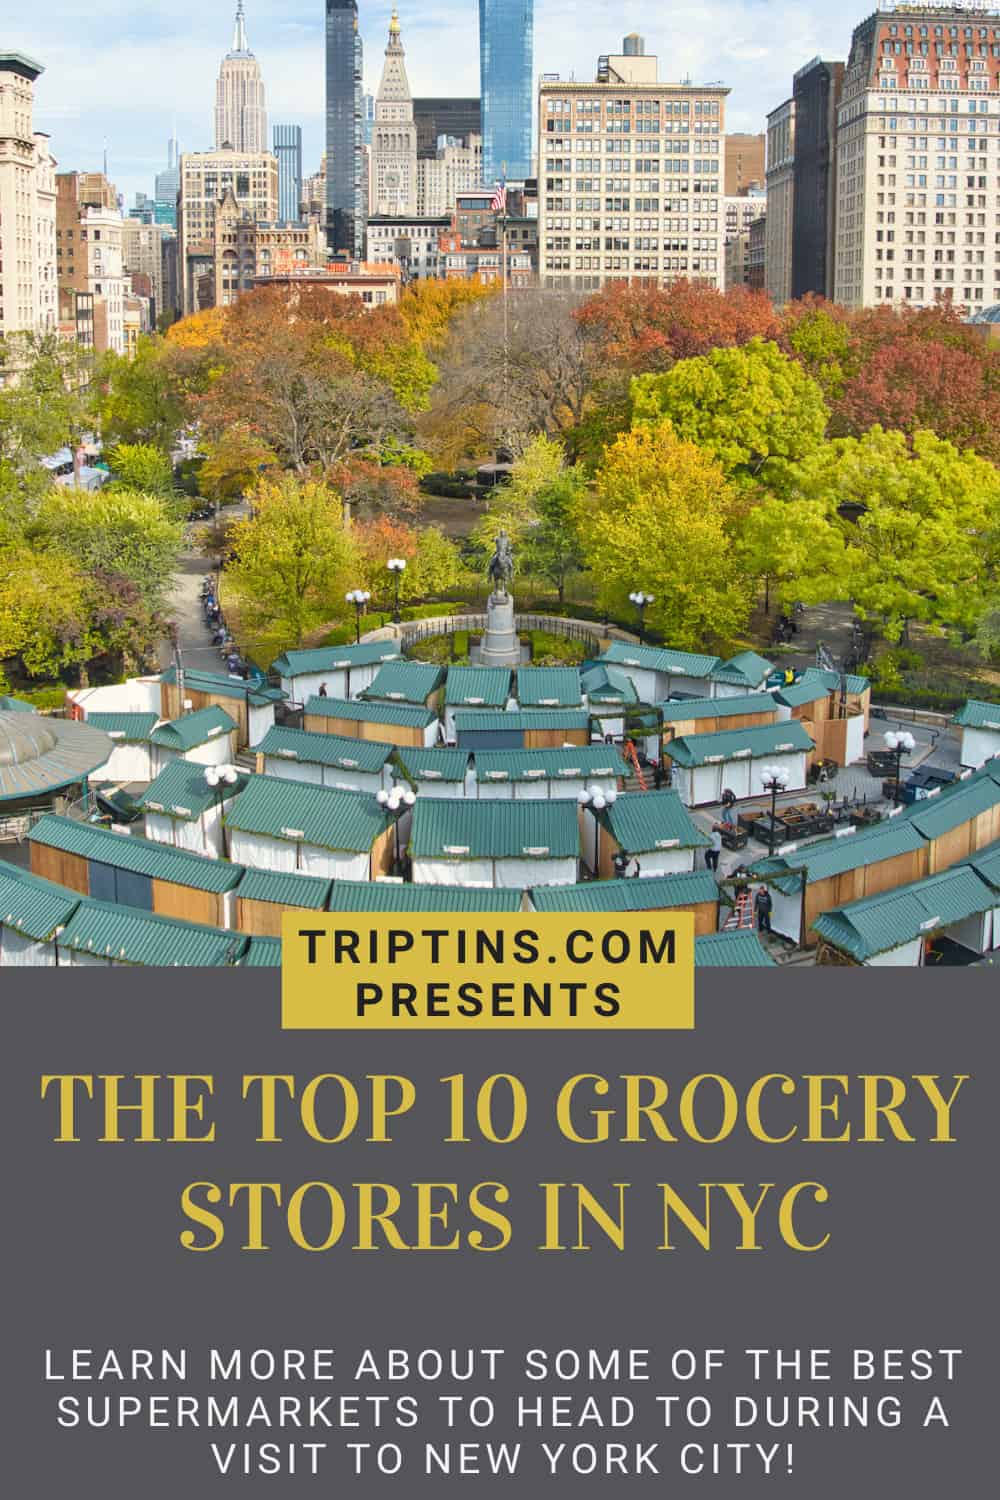 Supermarkets in NYC